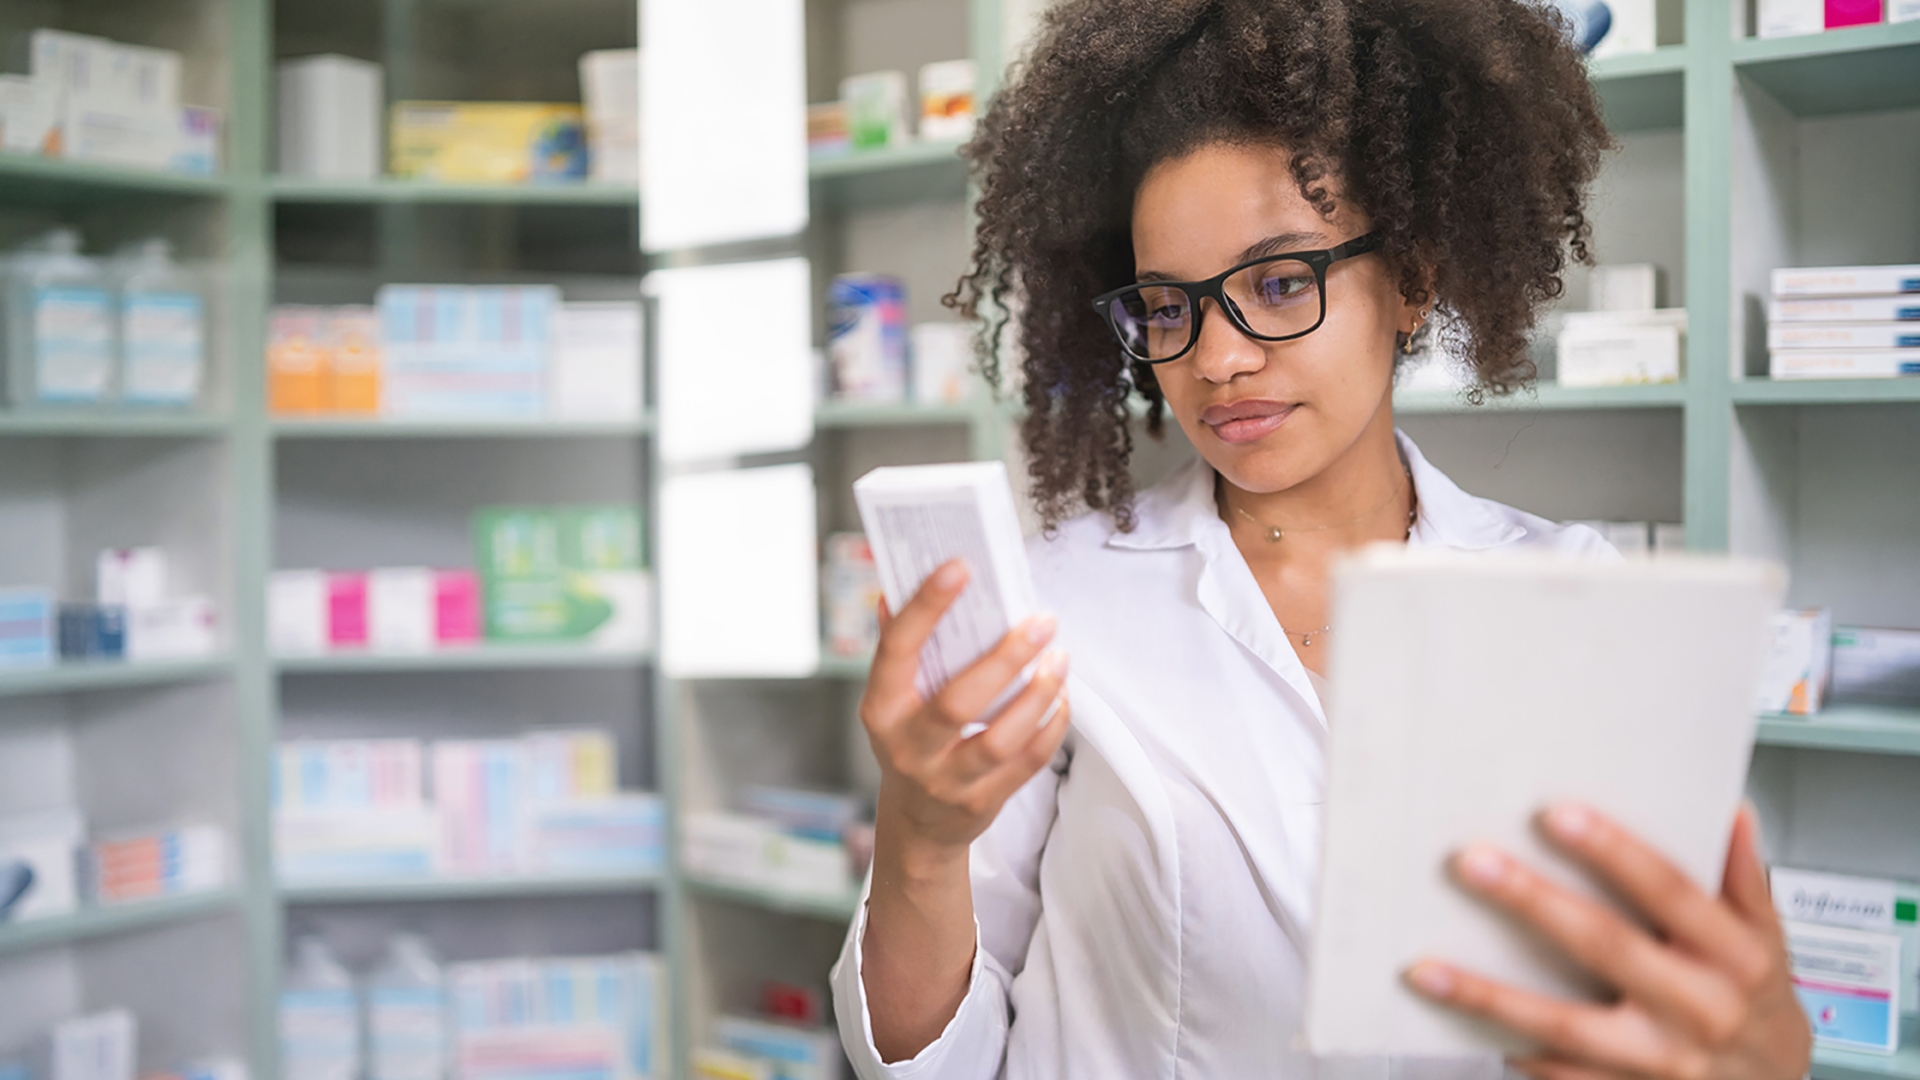 Person looking at a box of medication with a tablet in their hands standing in front of a shelf of medication.